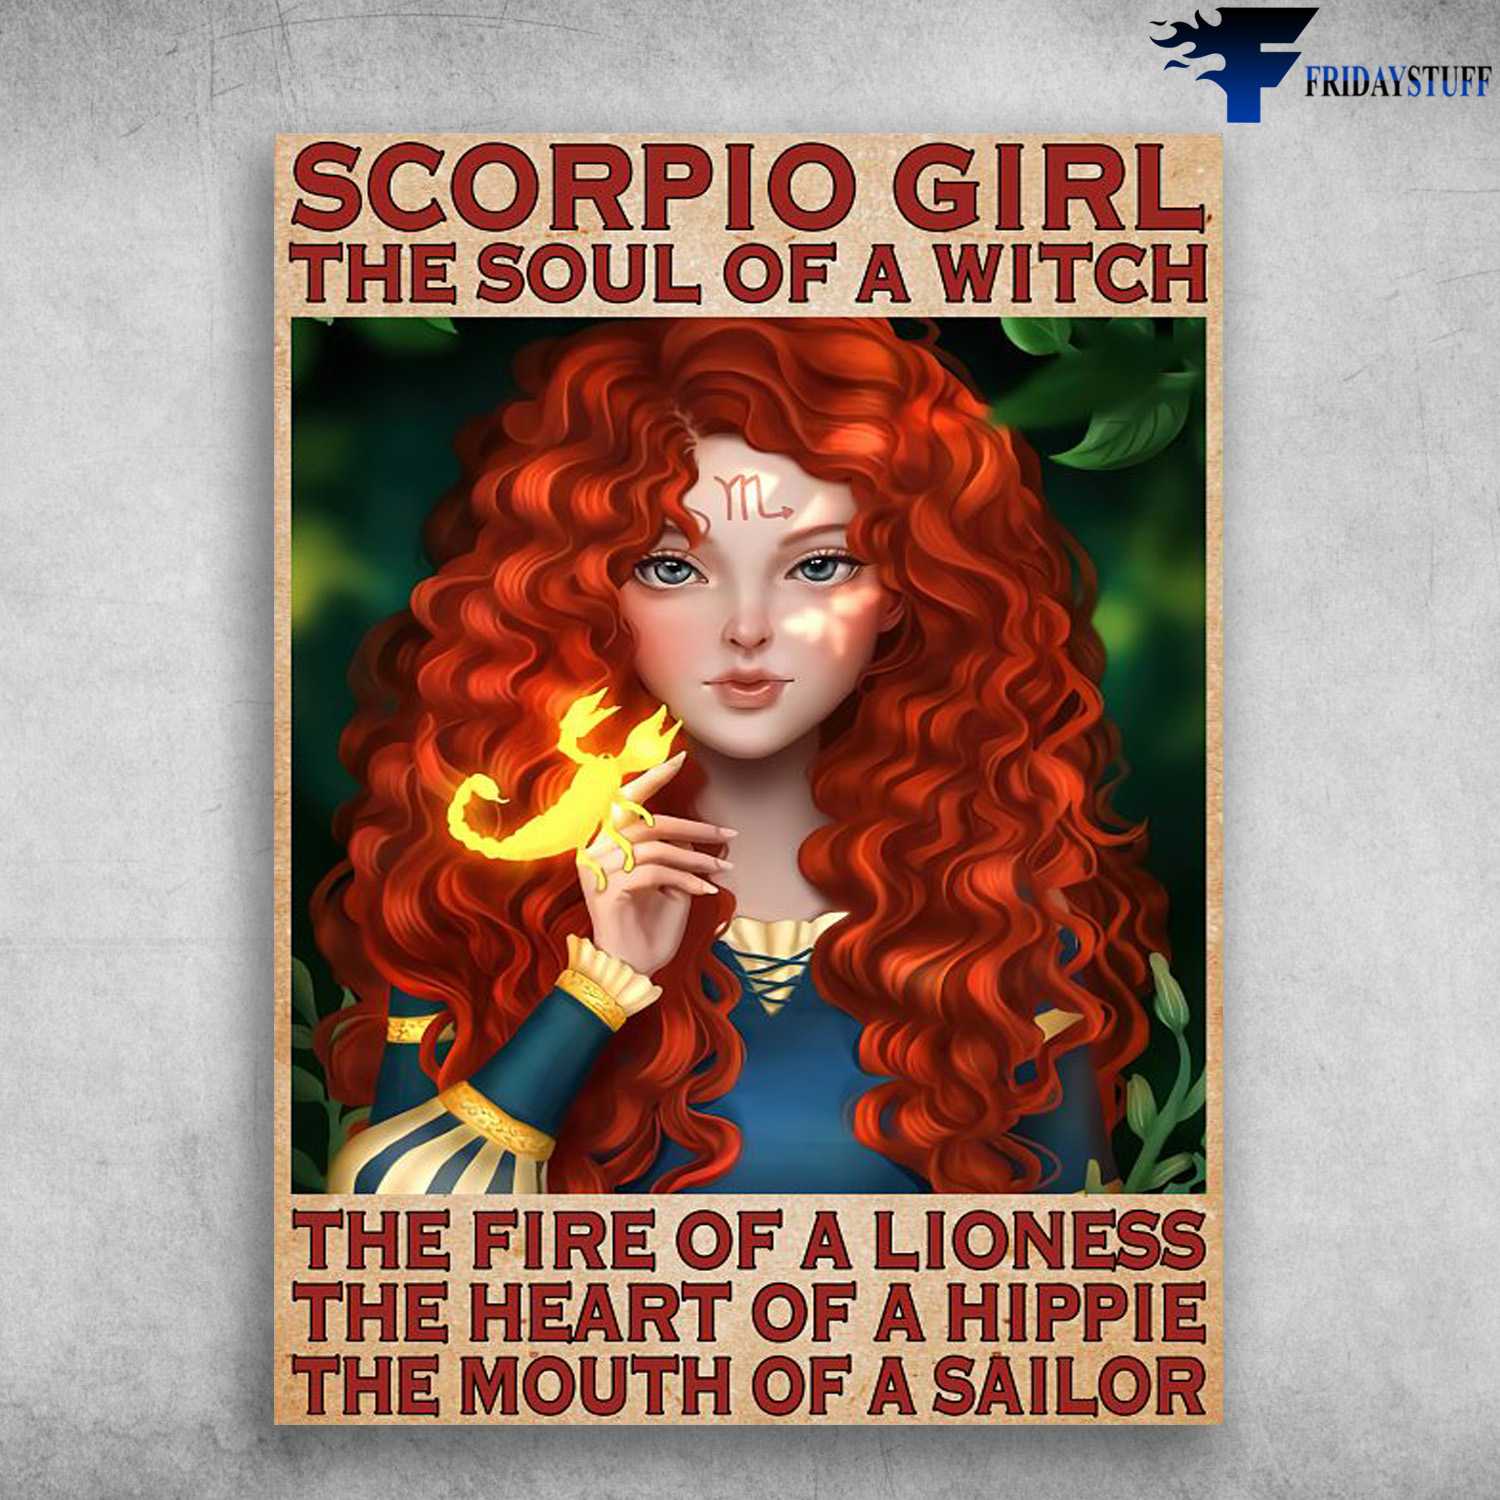 Scorpio Girl, Birthday Poster, The Soul Of A Witch, The Fire Of A Lioness, The Heart Of A Hippie, The Mouth Of A Sailor